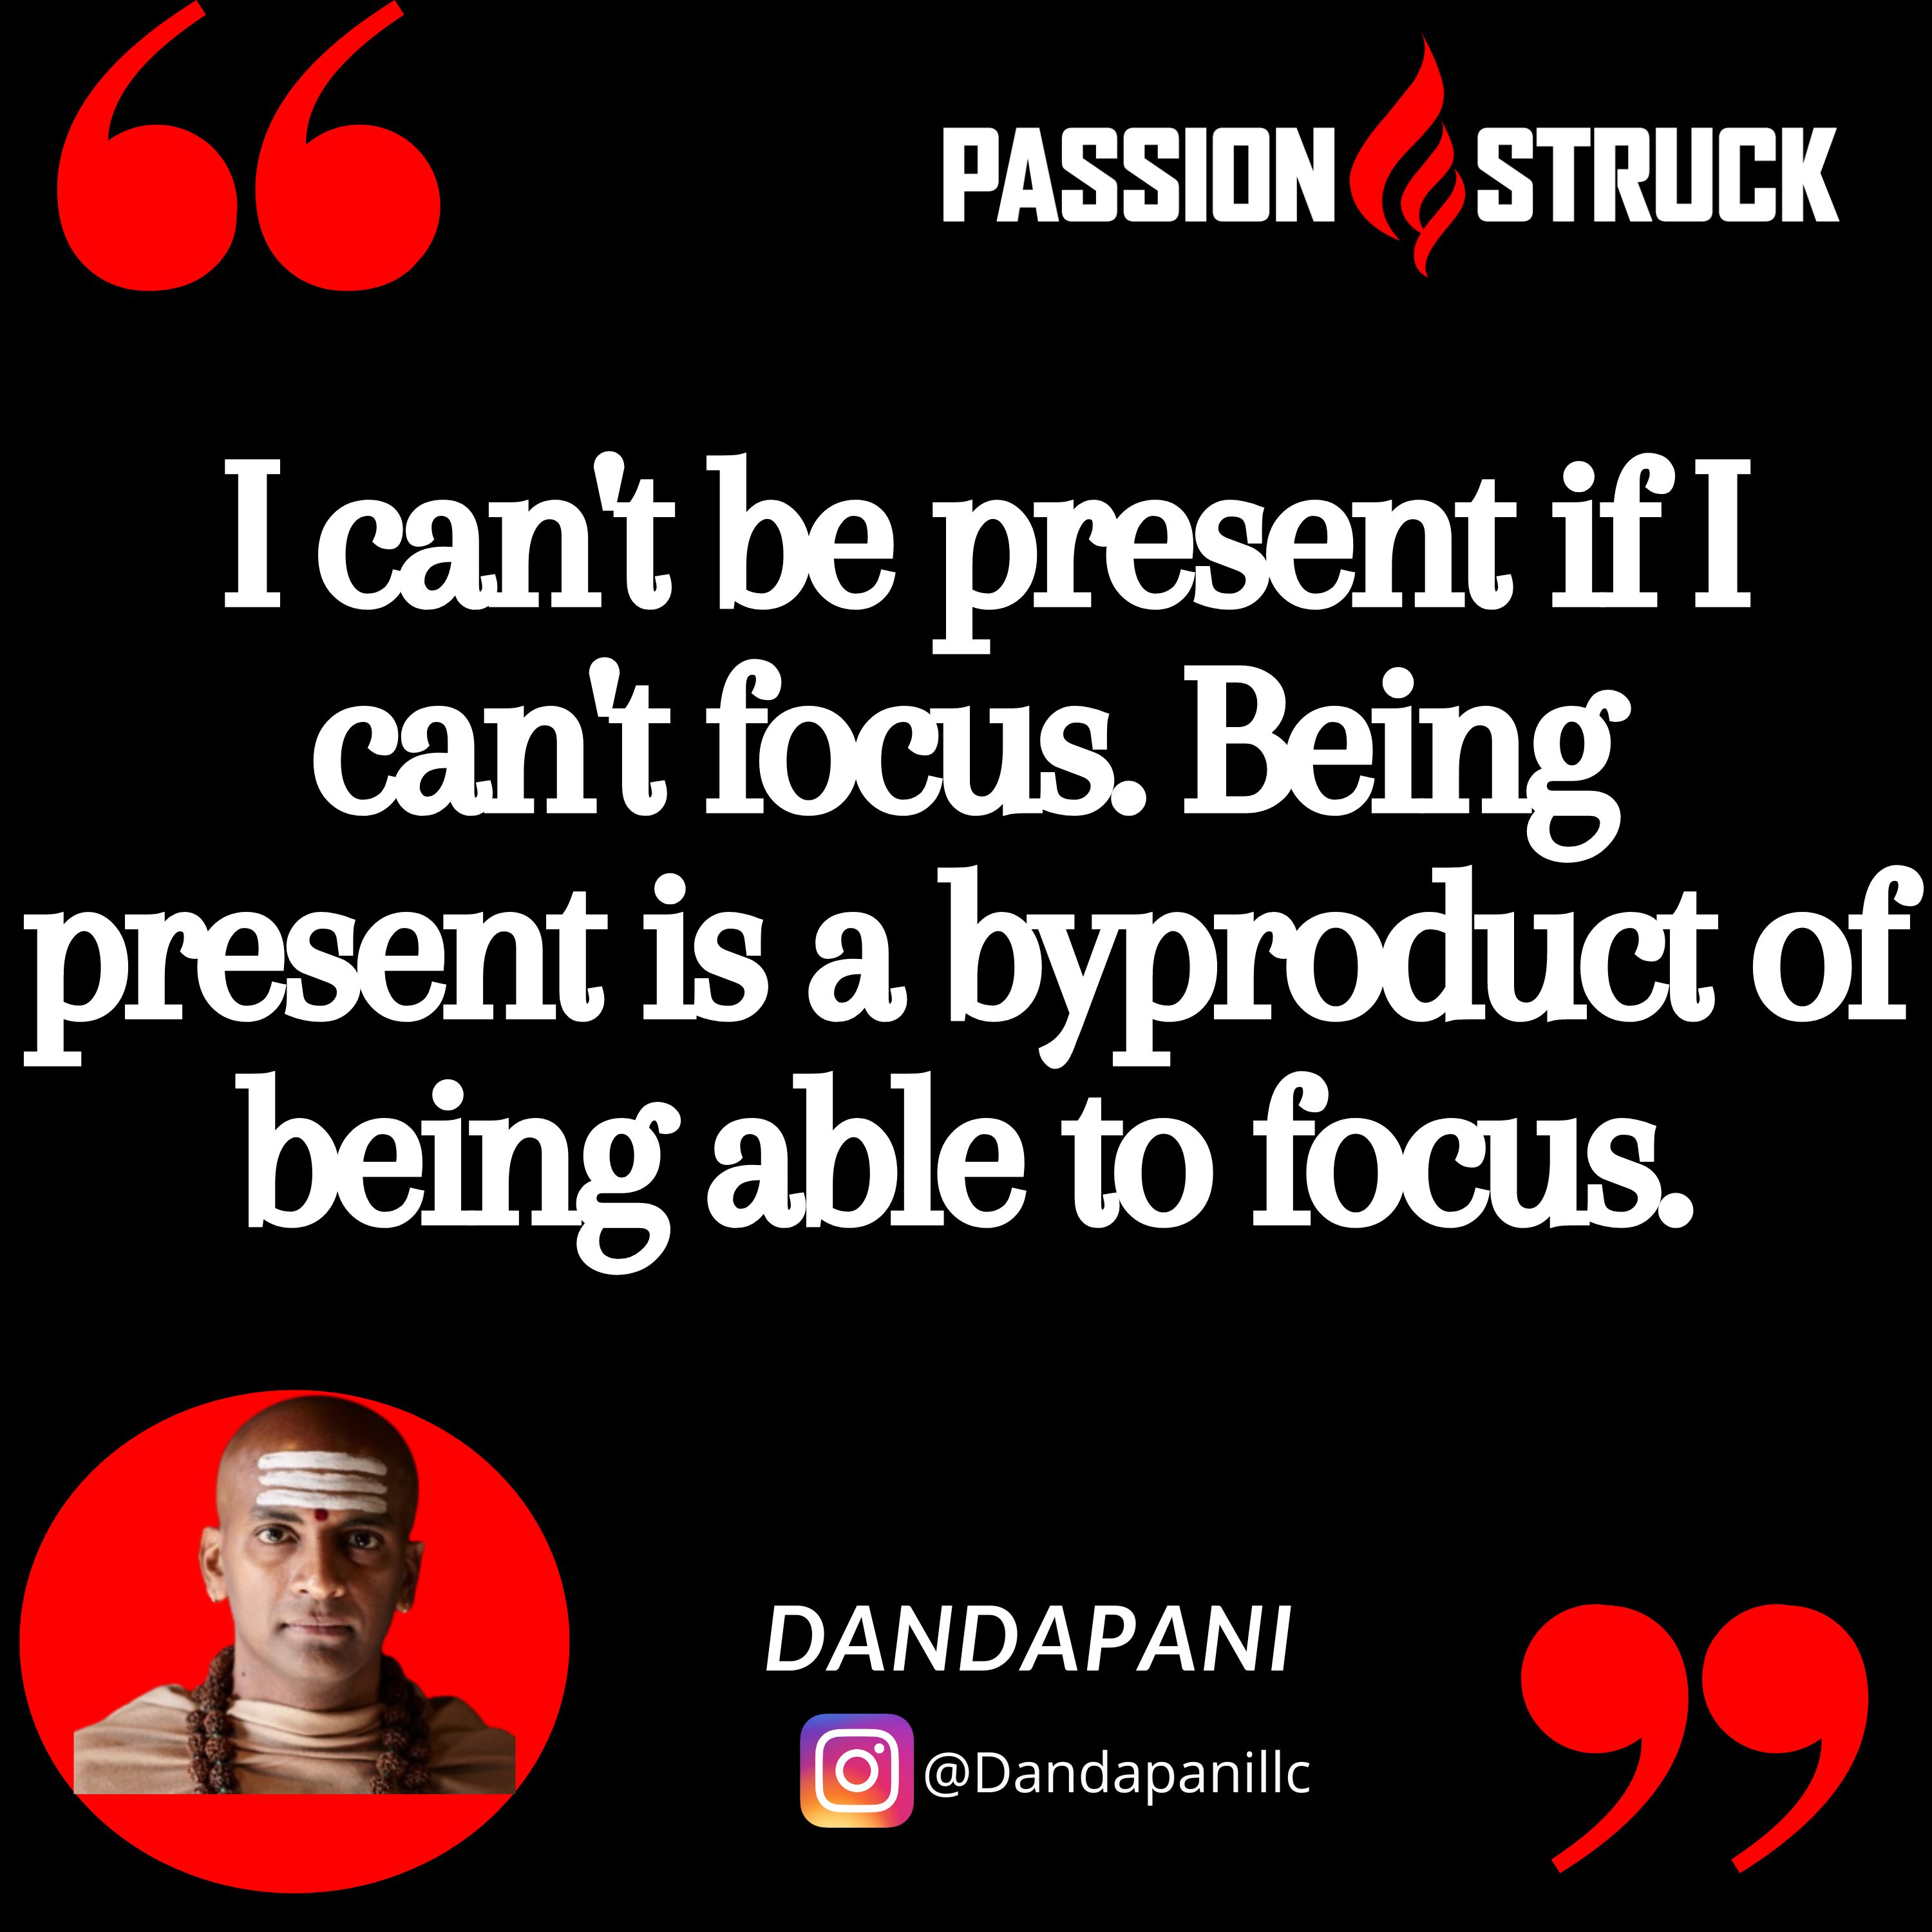 Dandapani quote from the passion struck podcast about unwavering focus:  I can't be present if I can't focus. Being present is a byproduct of being able to focus.